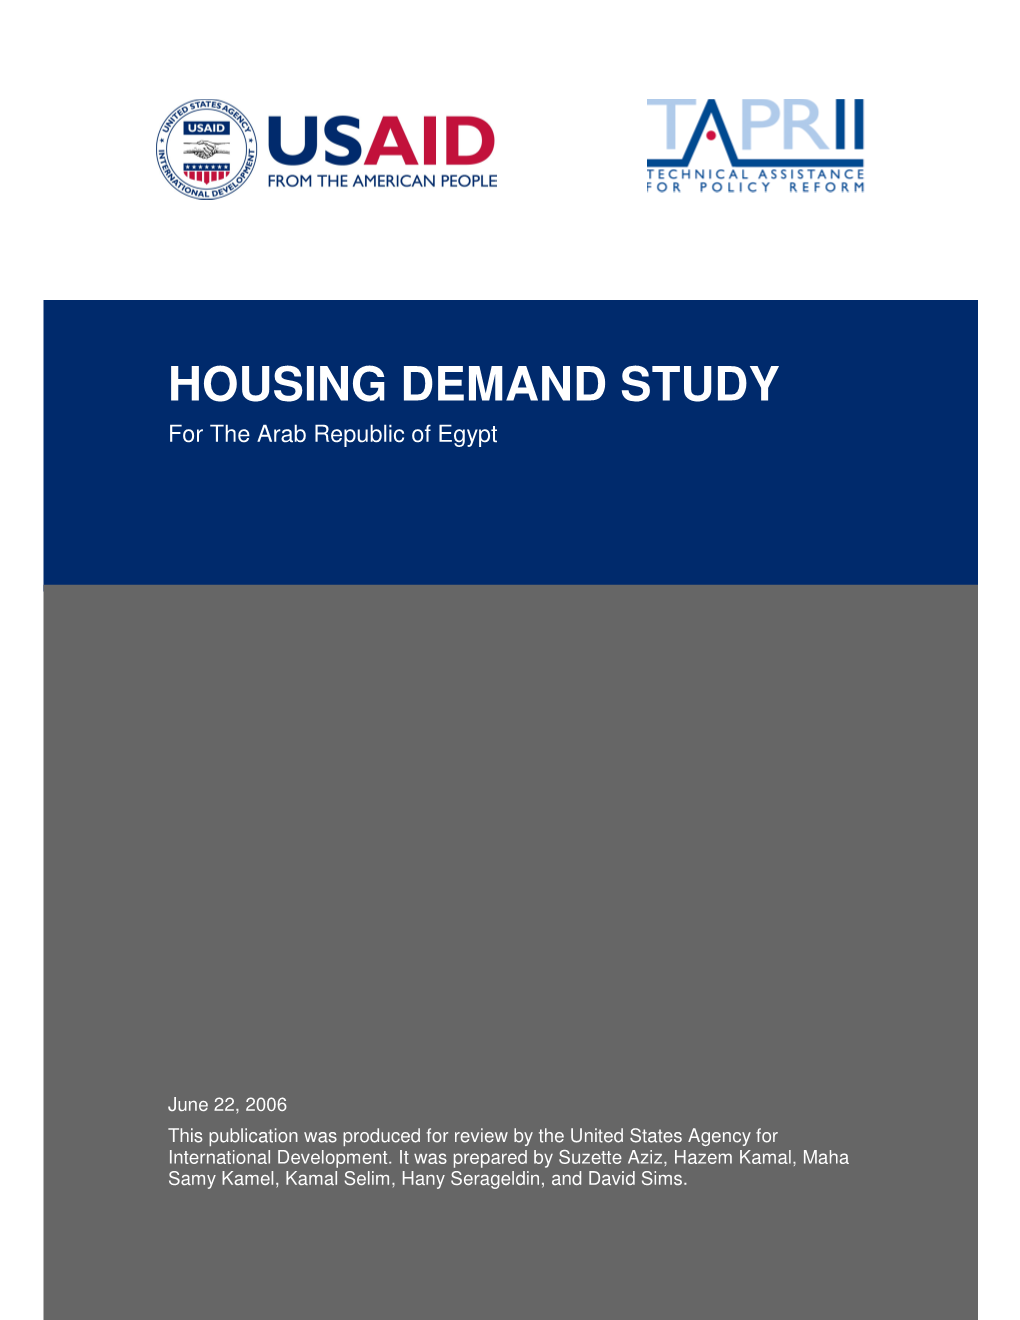 HOUSING DEMAND STUDY for the Arab Republic of Egypt